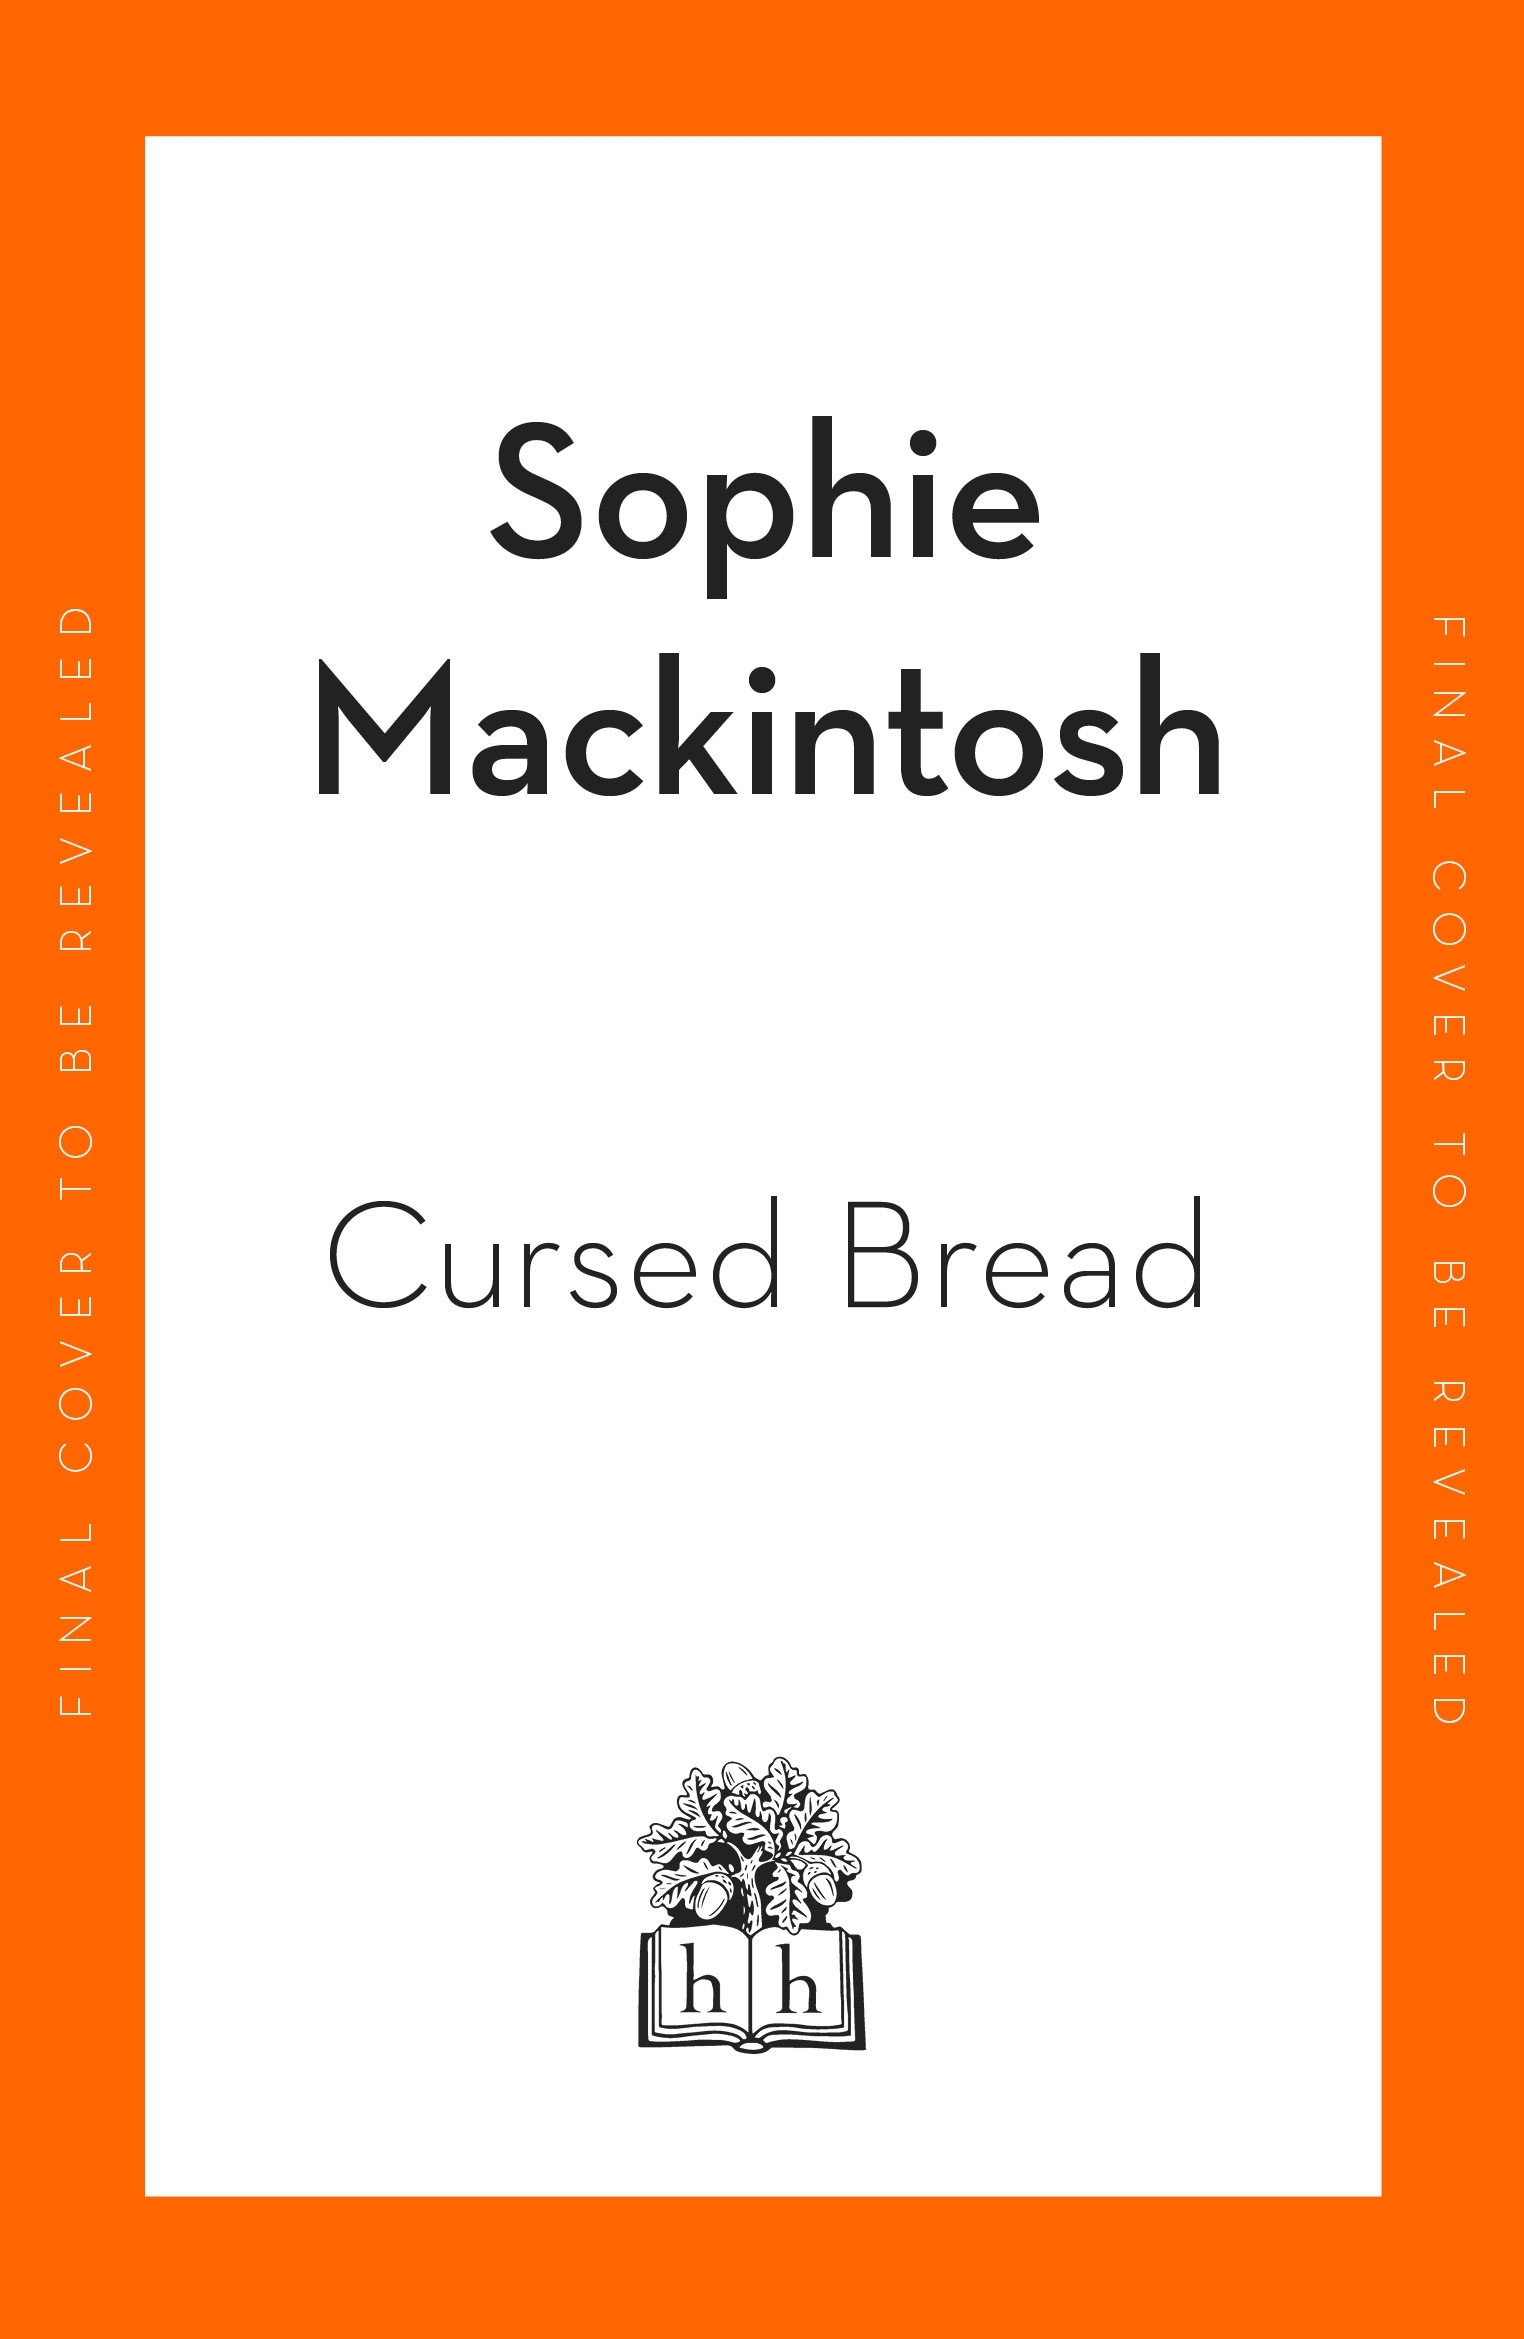 Book “Cursed Bread” by Sophie Mackintosh — March 2, 2023